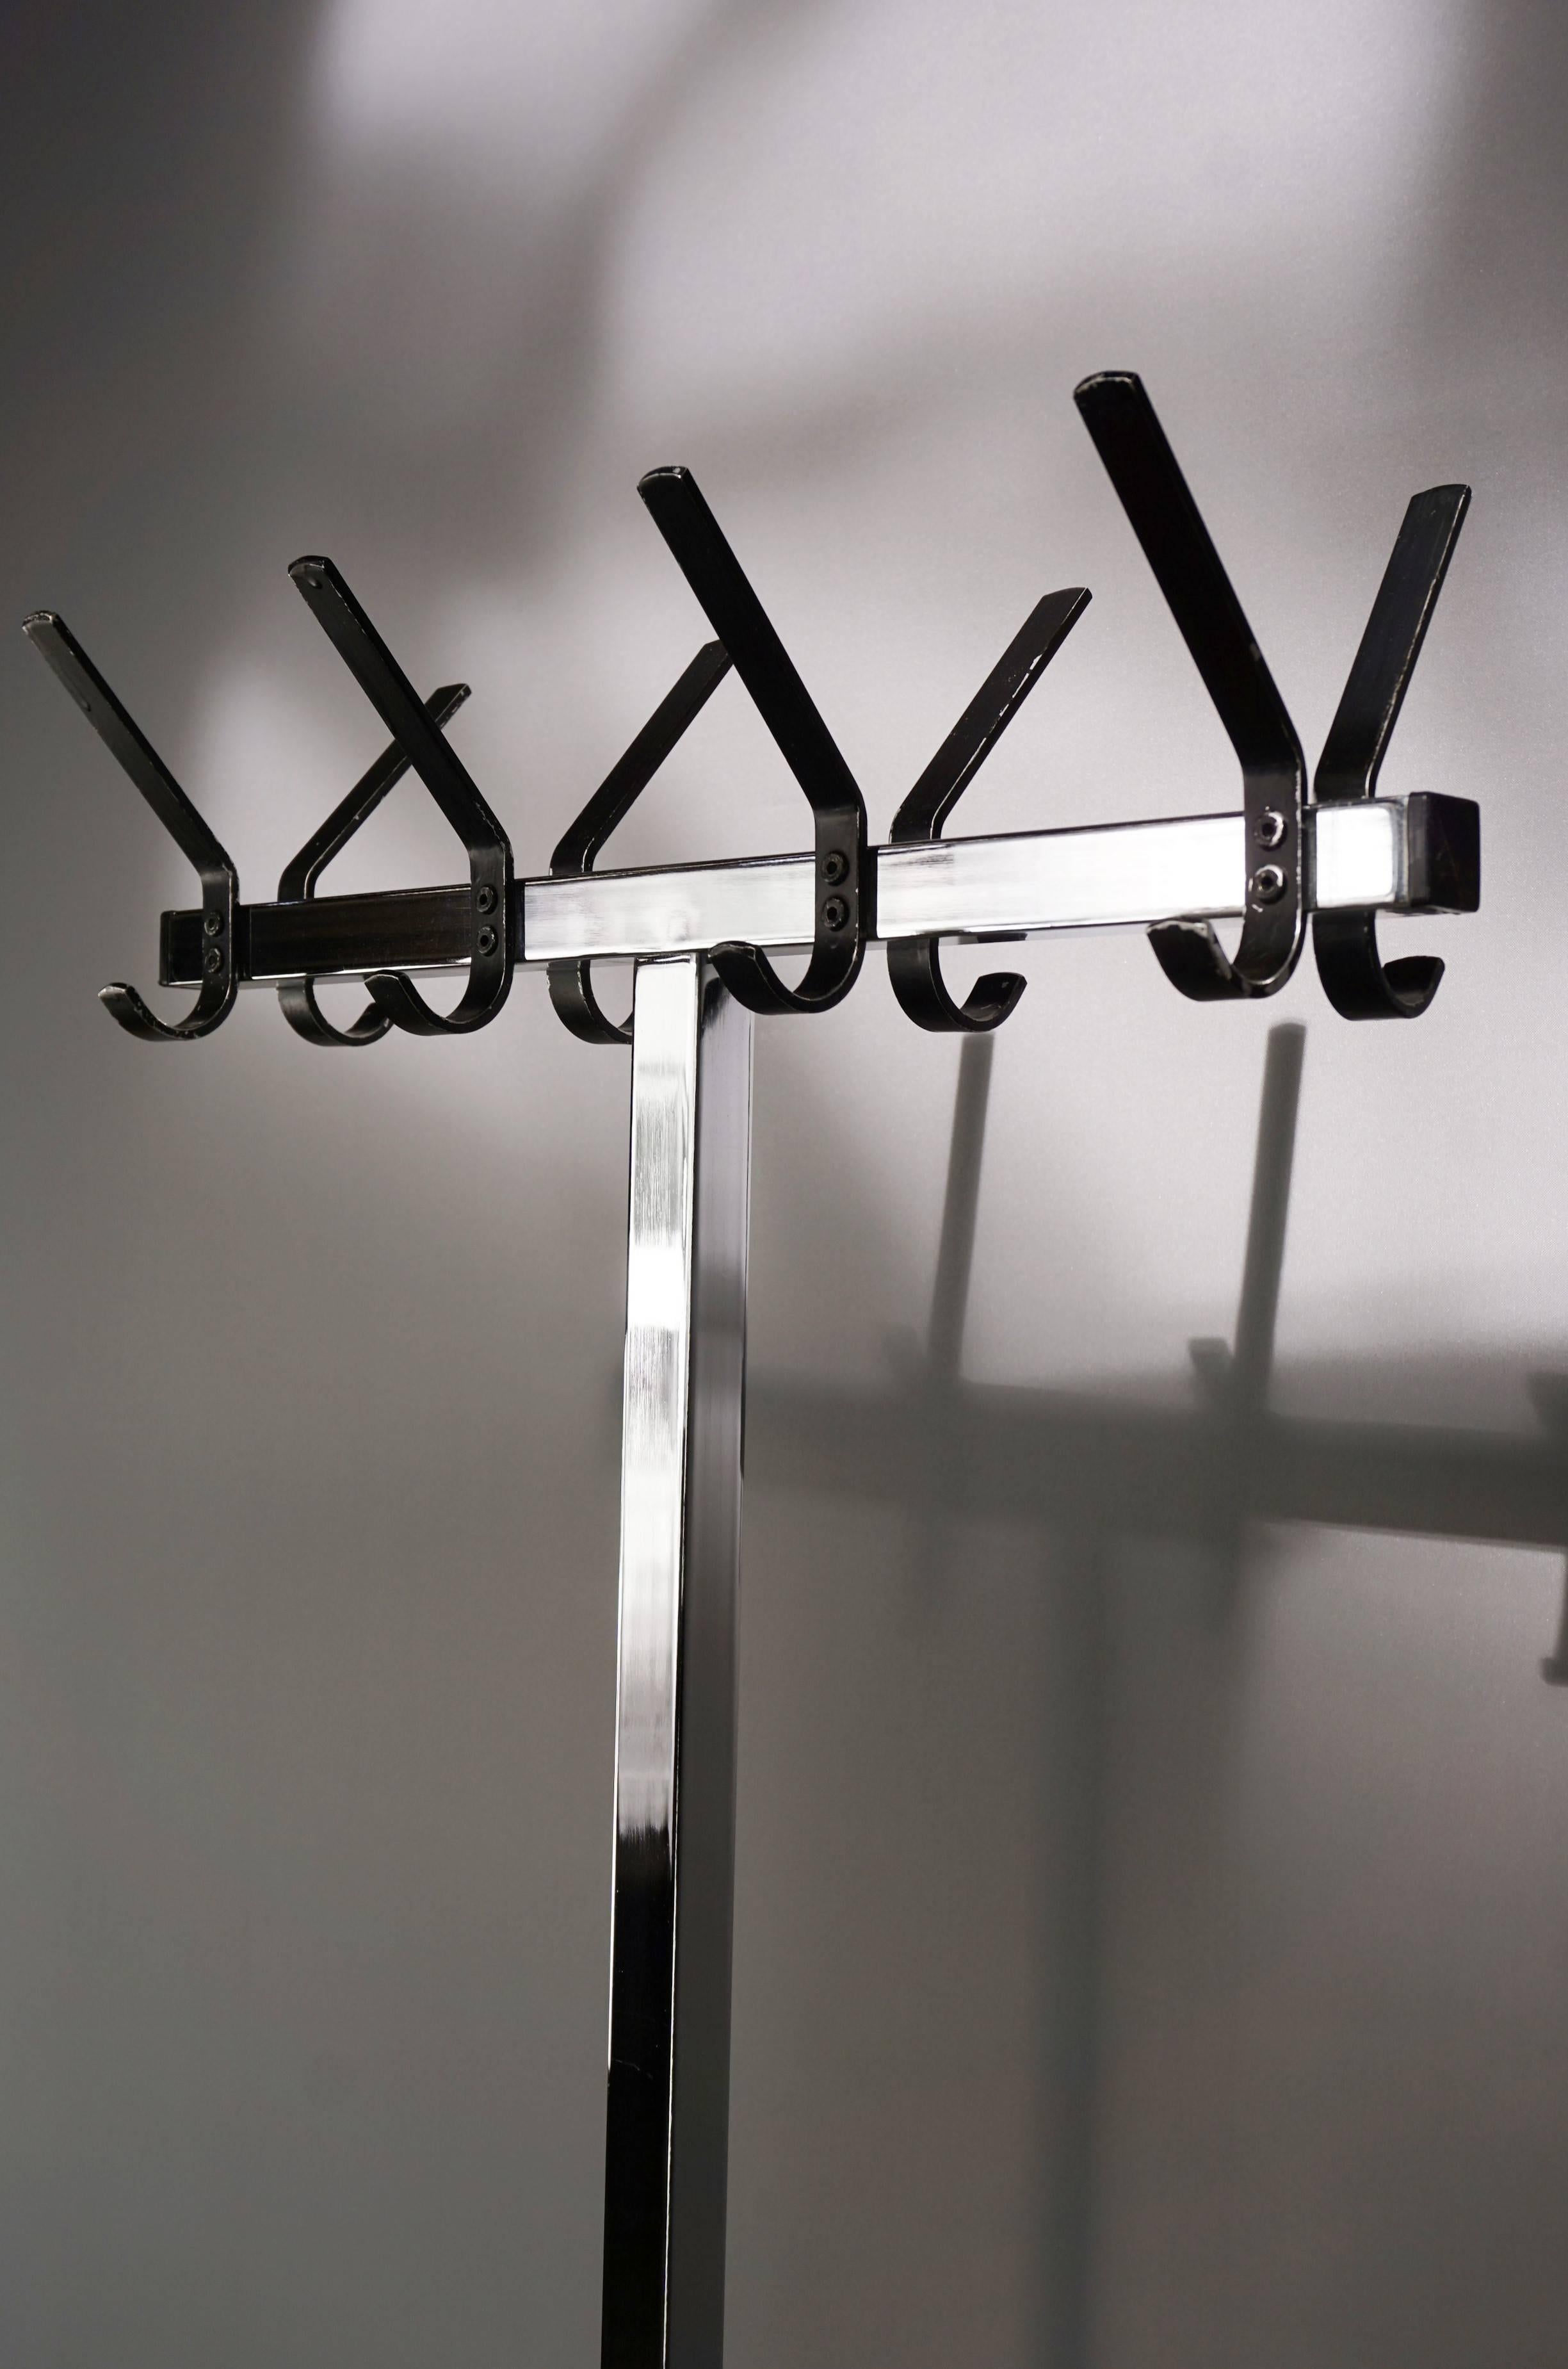 Mid-20th Century Metal Coat Rack Industrial Style from the 1950s For Sale